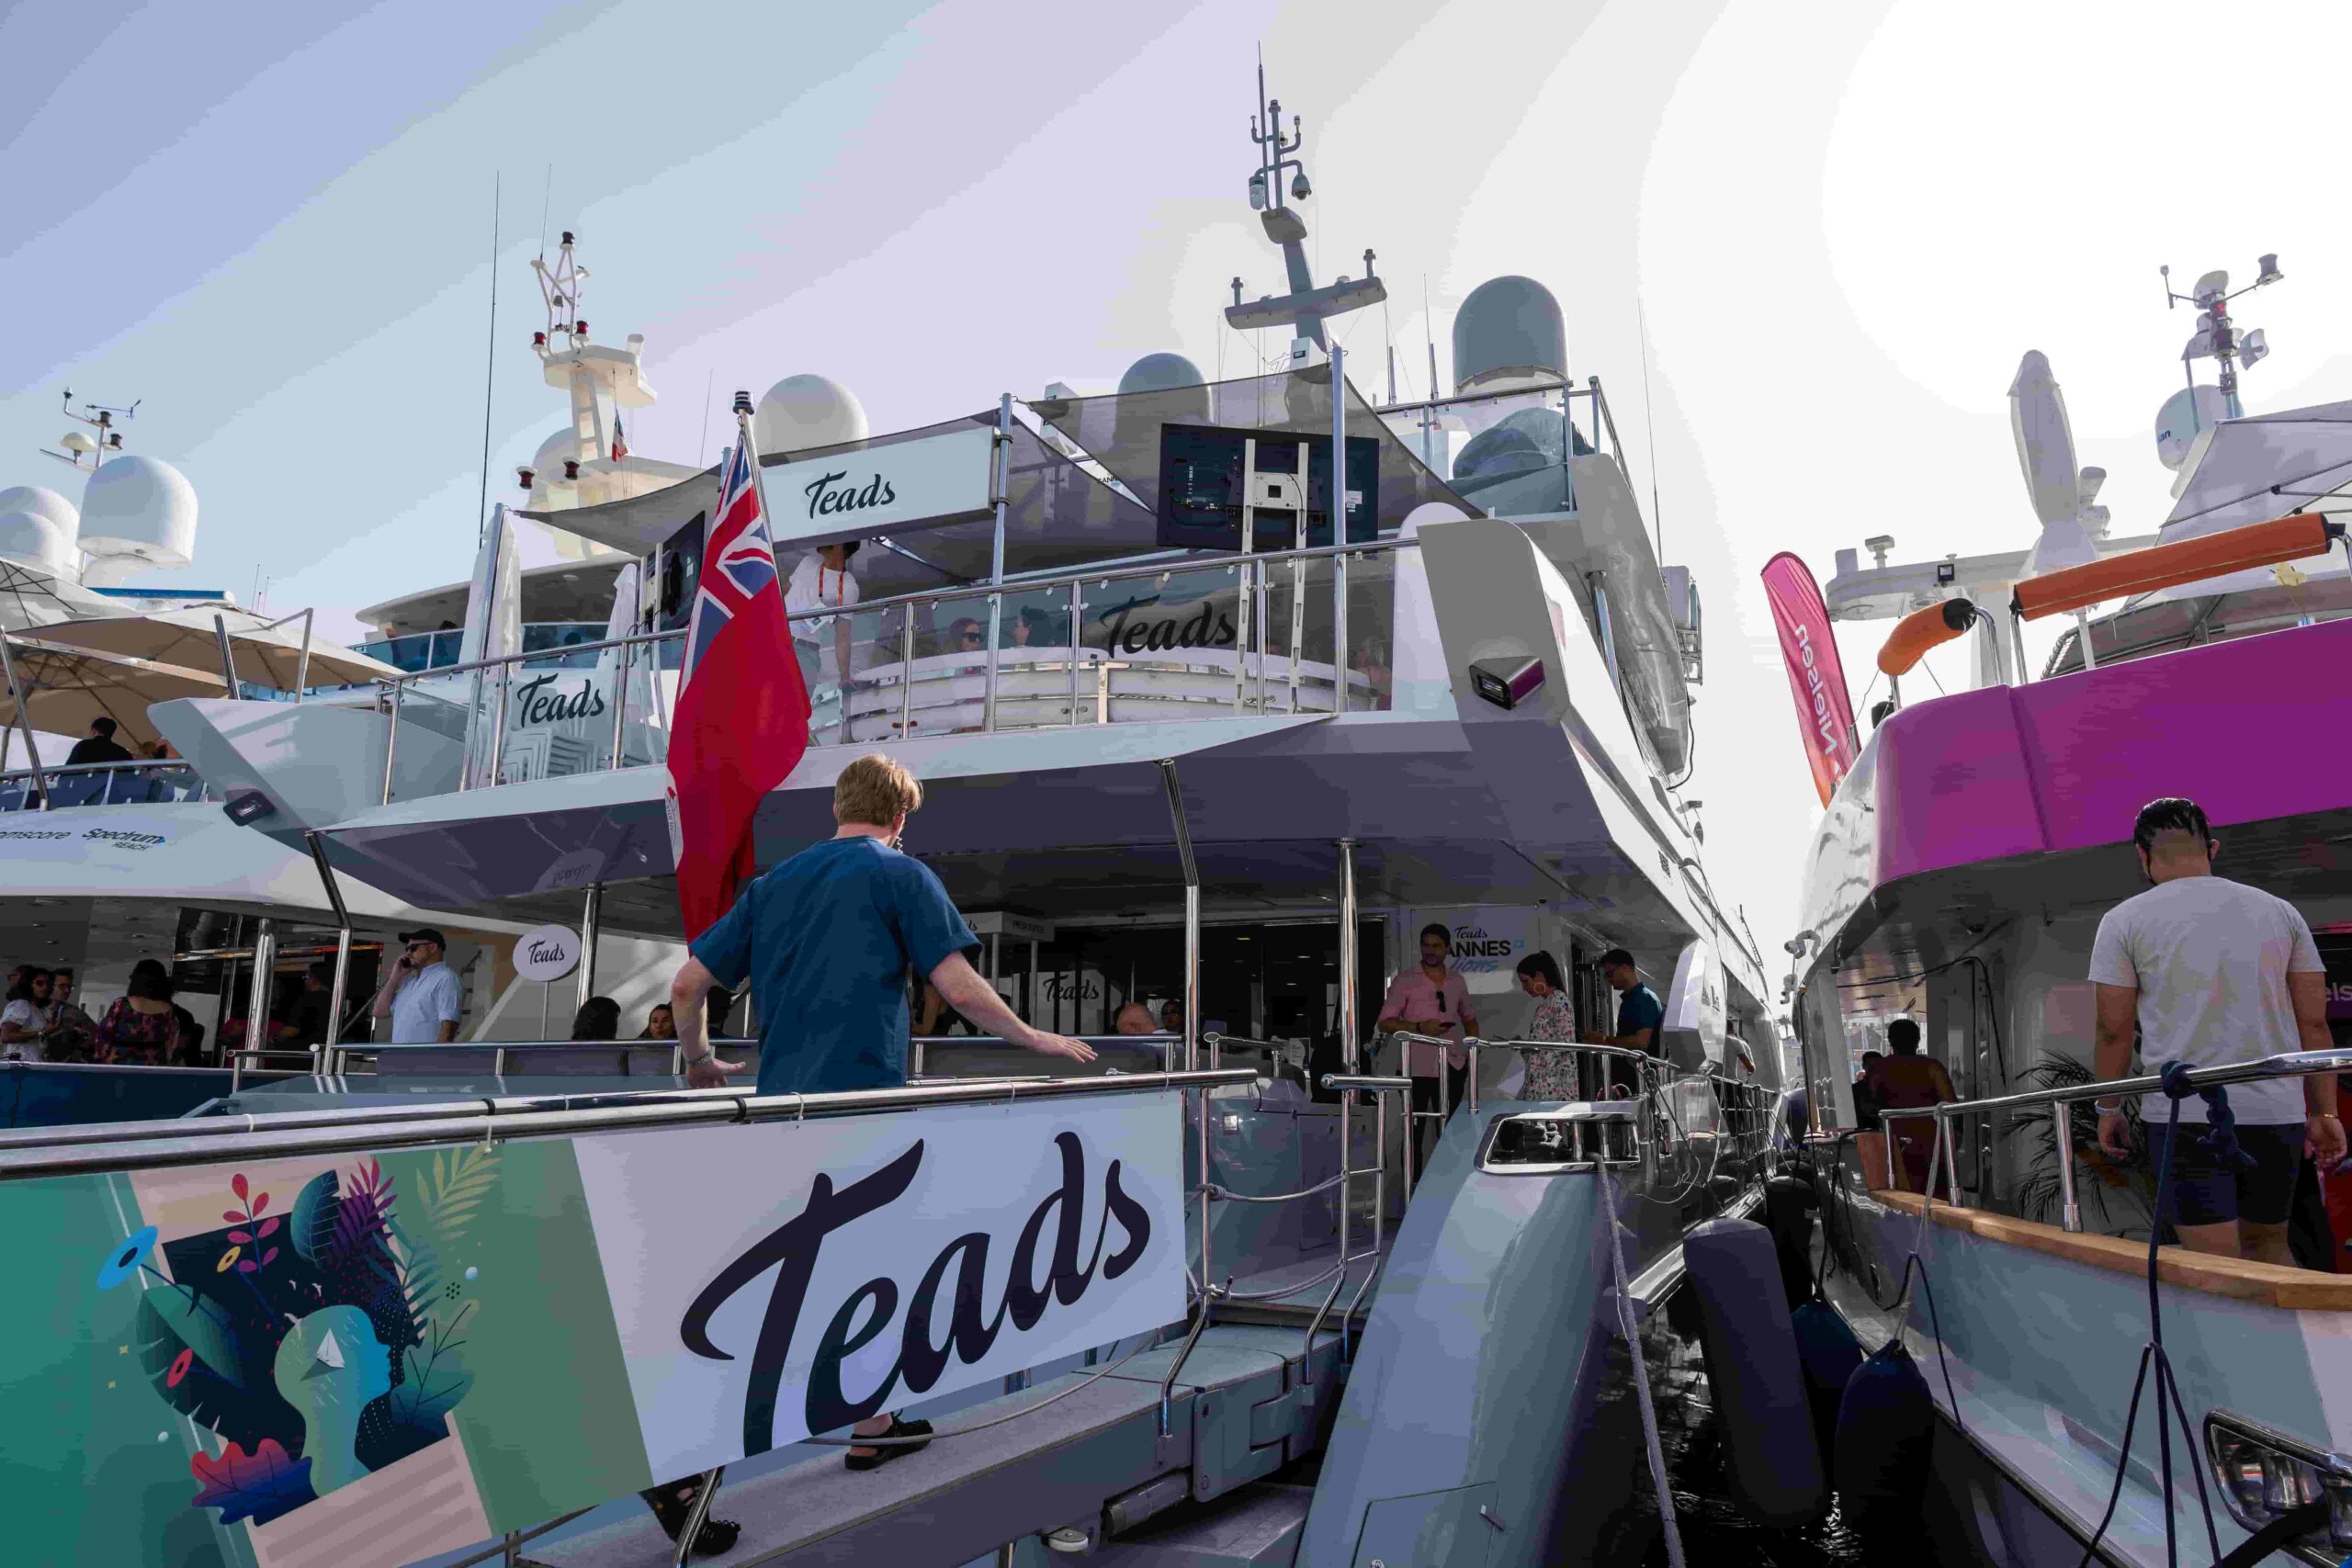 The Teads Yacht at Cannes Advertising Festival